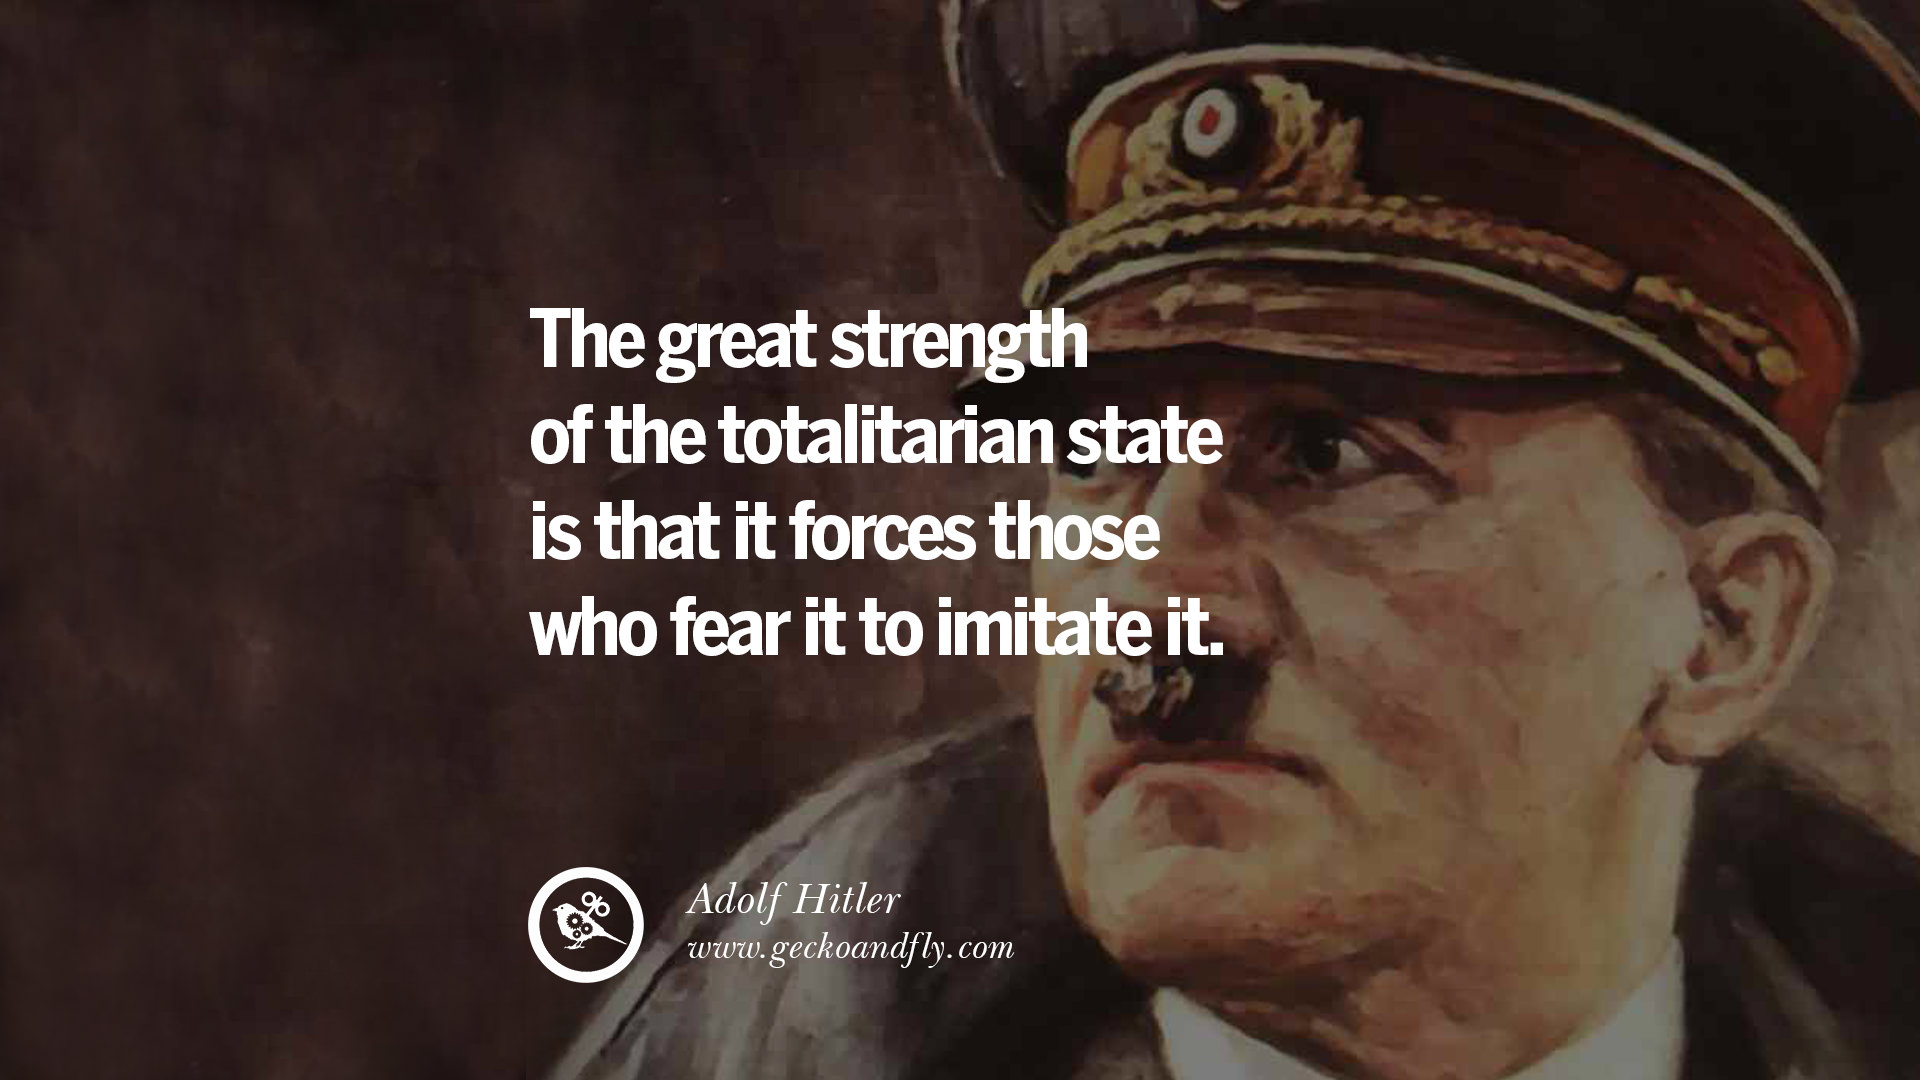 The great strength of the totalitarian state is that it force those who fears it to imitate it – Adolf Hitler